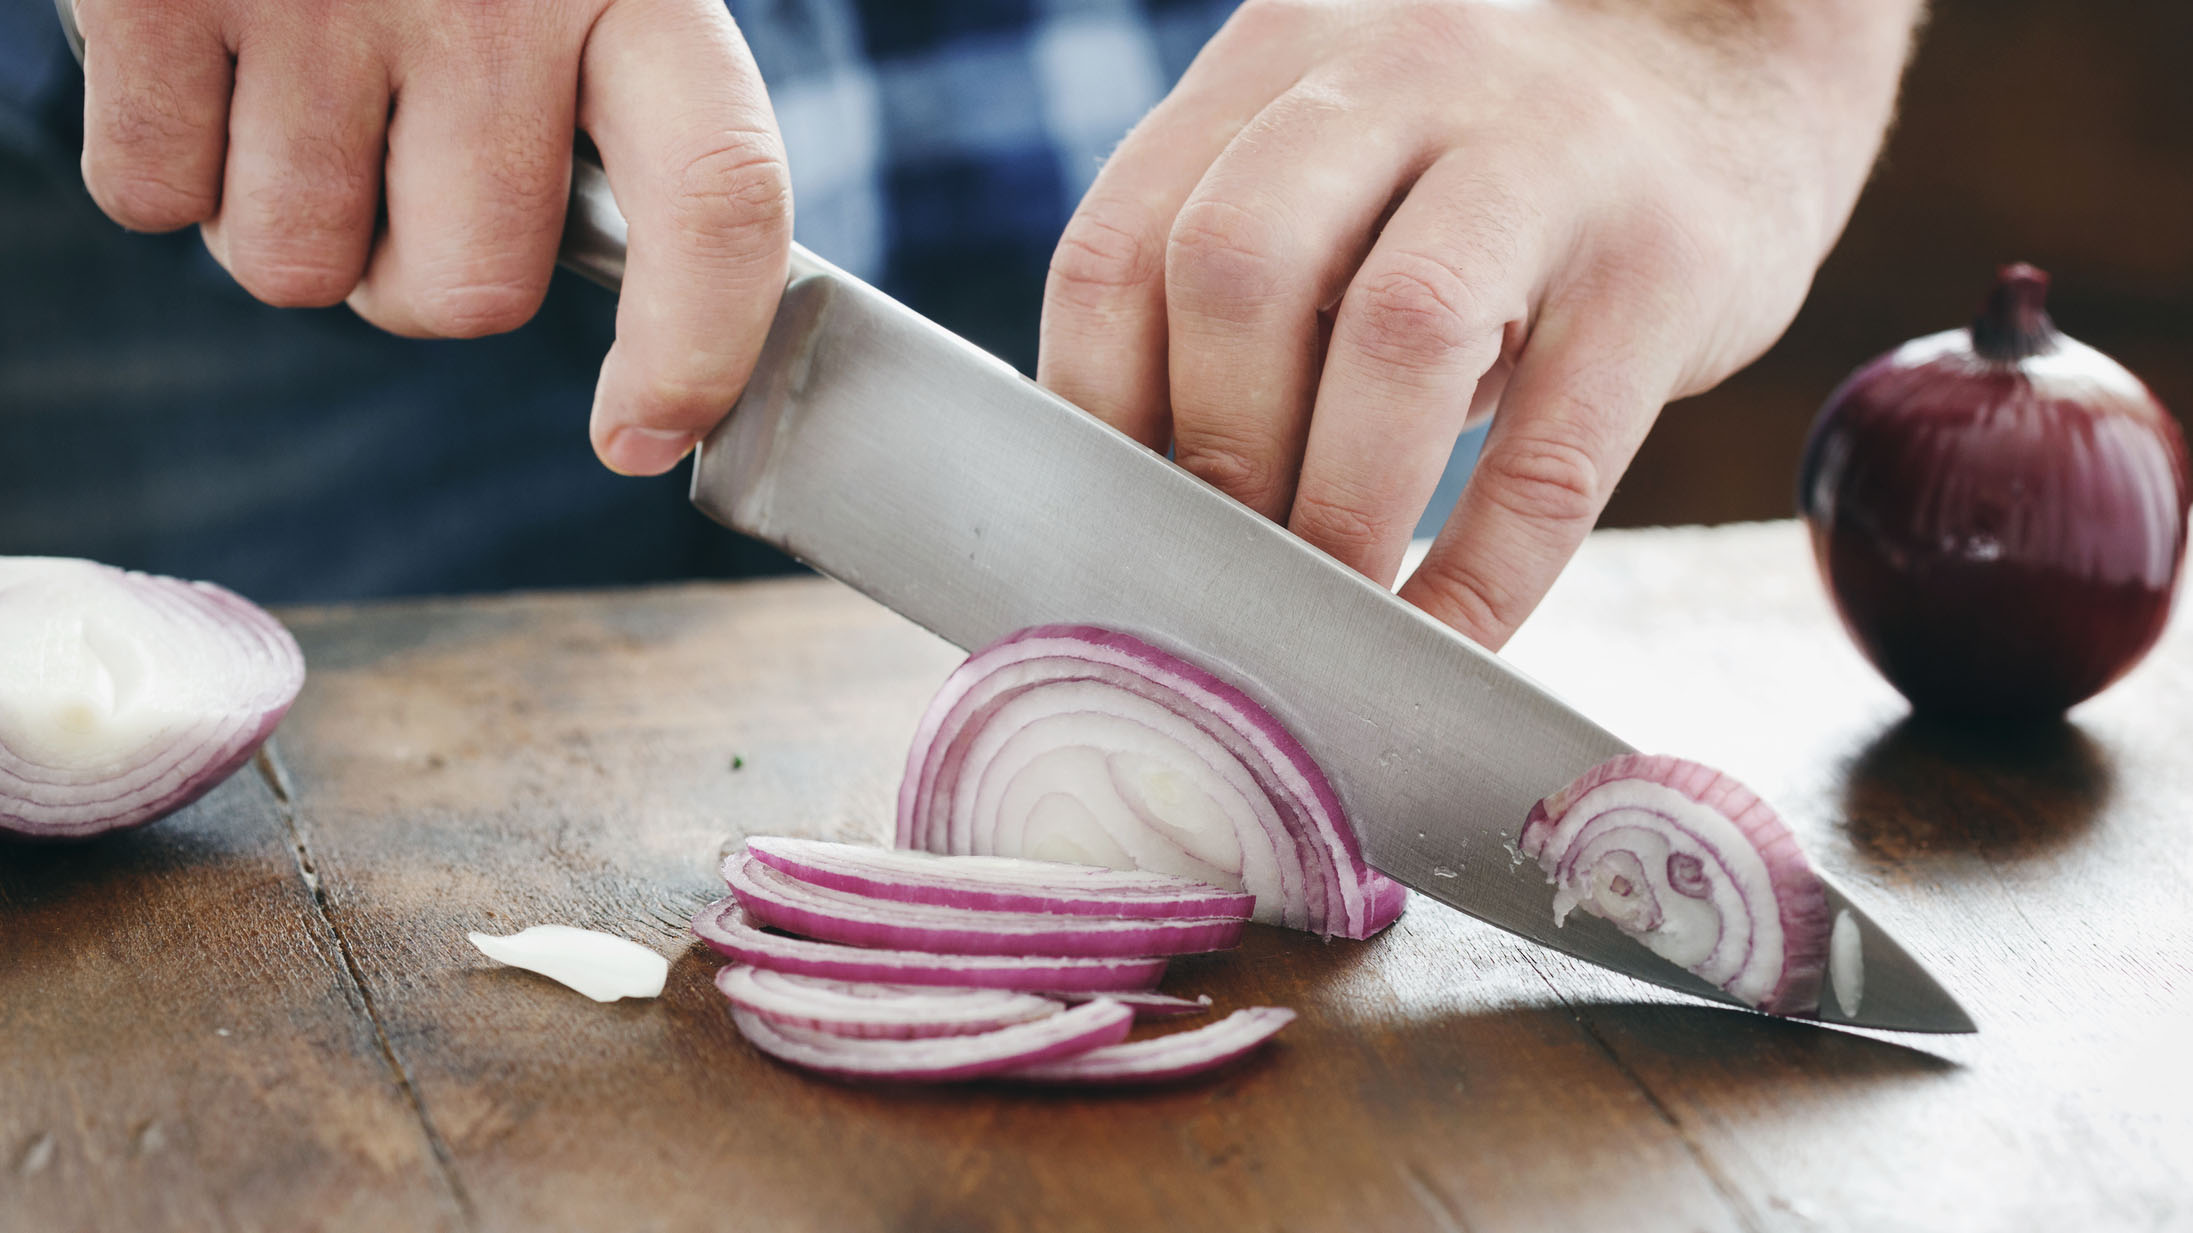 Male hands chopped red onion with a chef's knife on wooden table close up